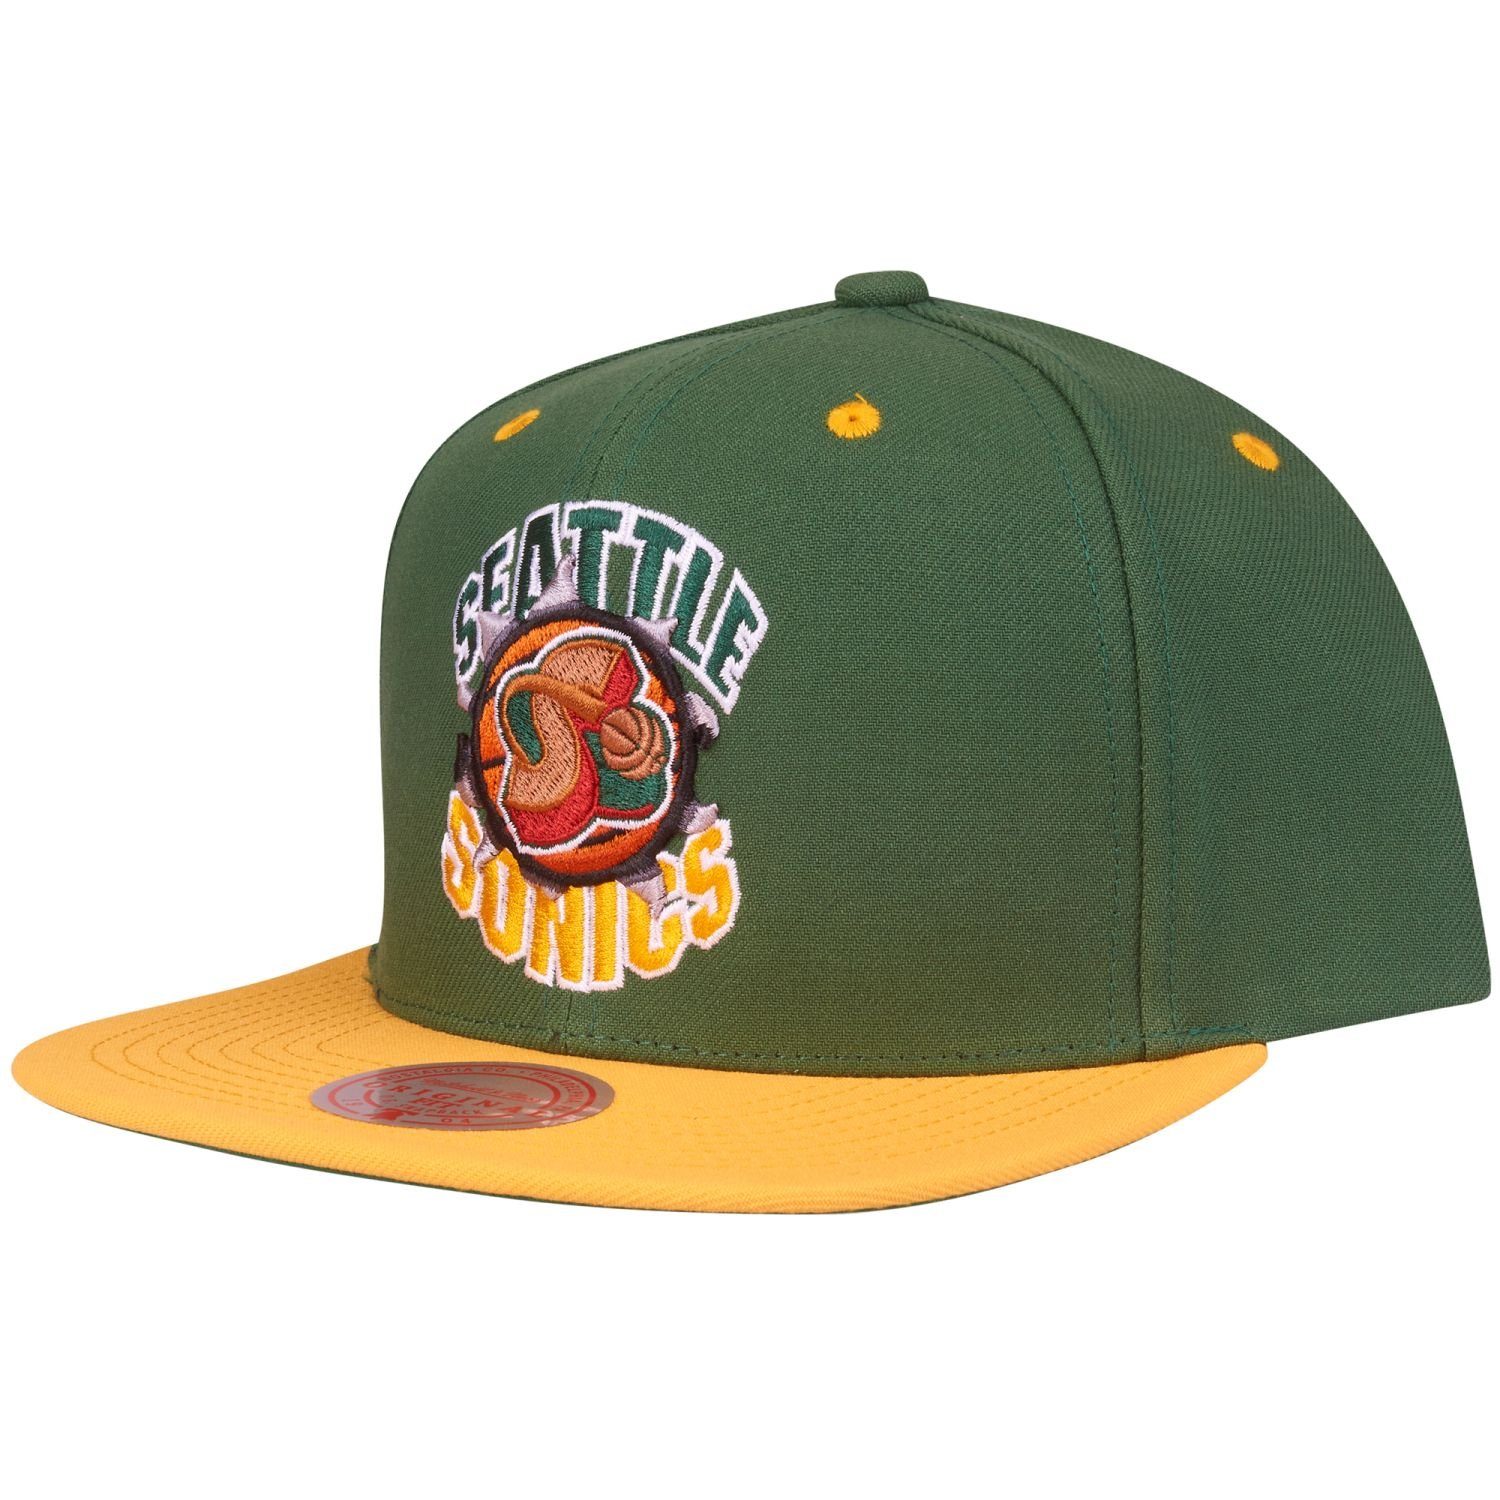 Supersonic BREAKTHROUGH Seattle Cap Mitchell Ness & Snapback